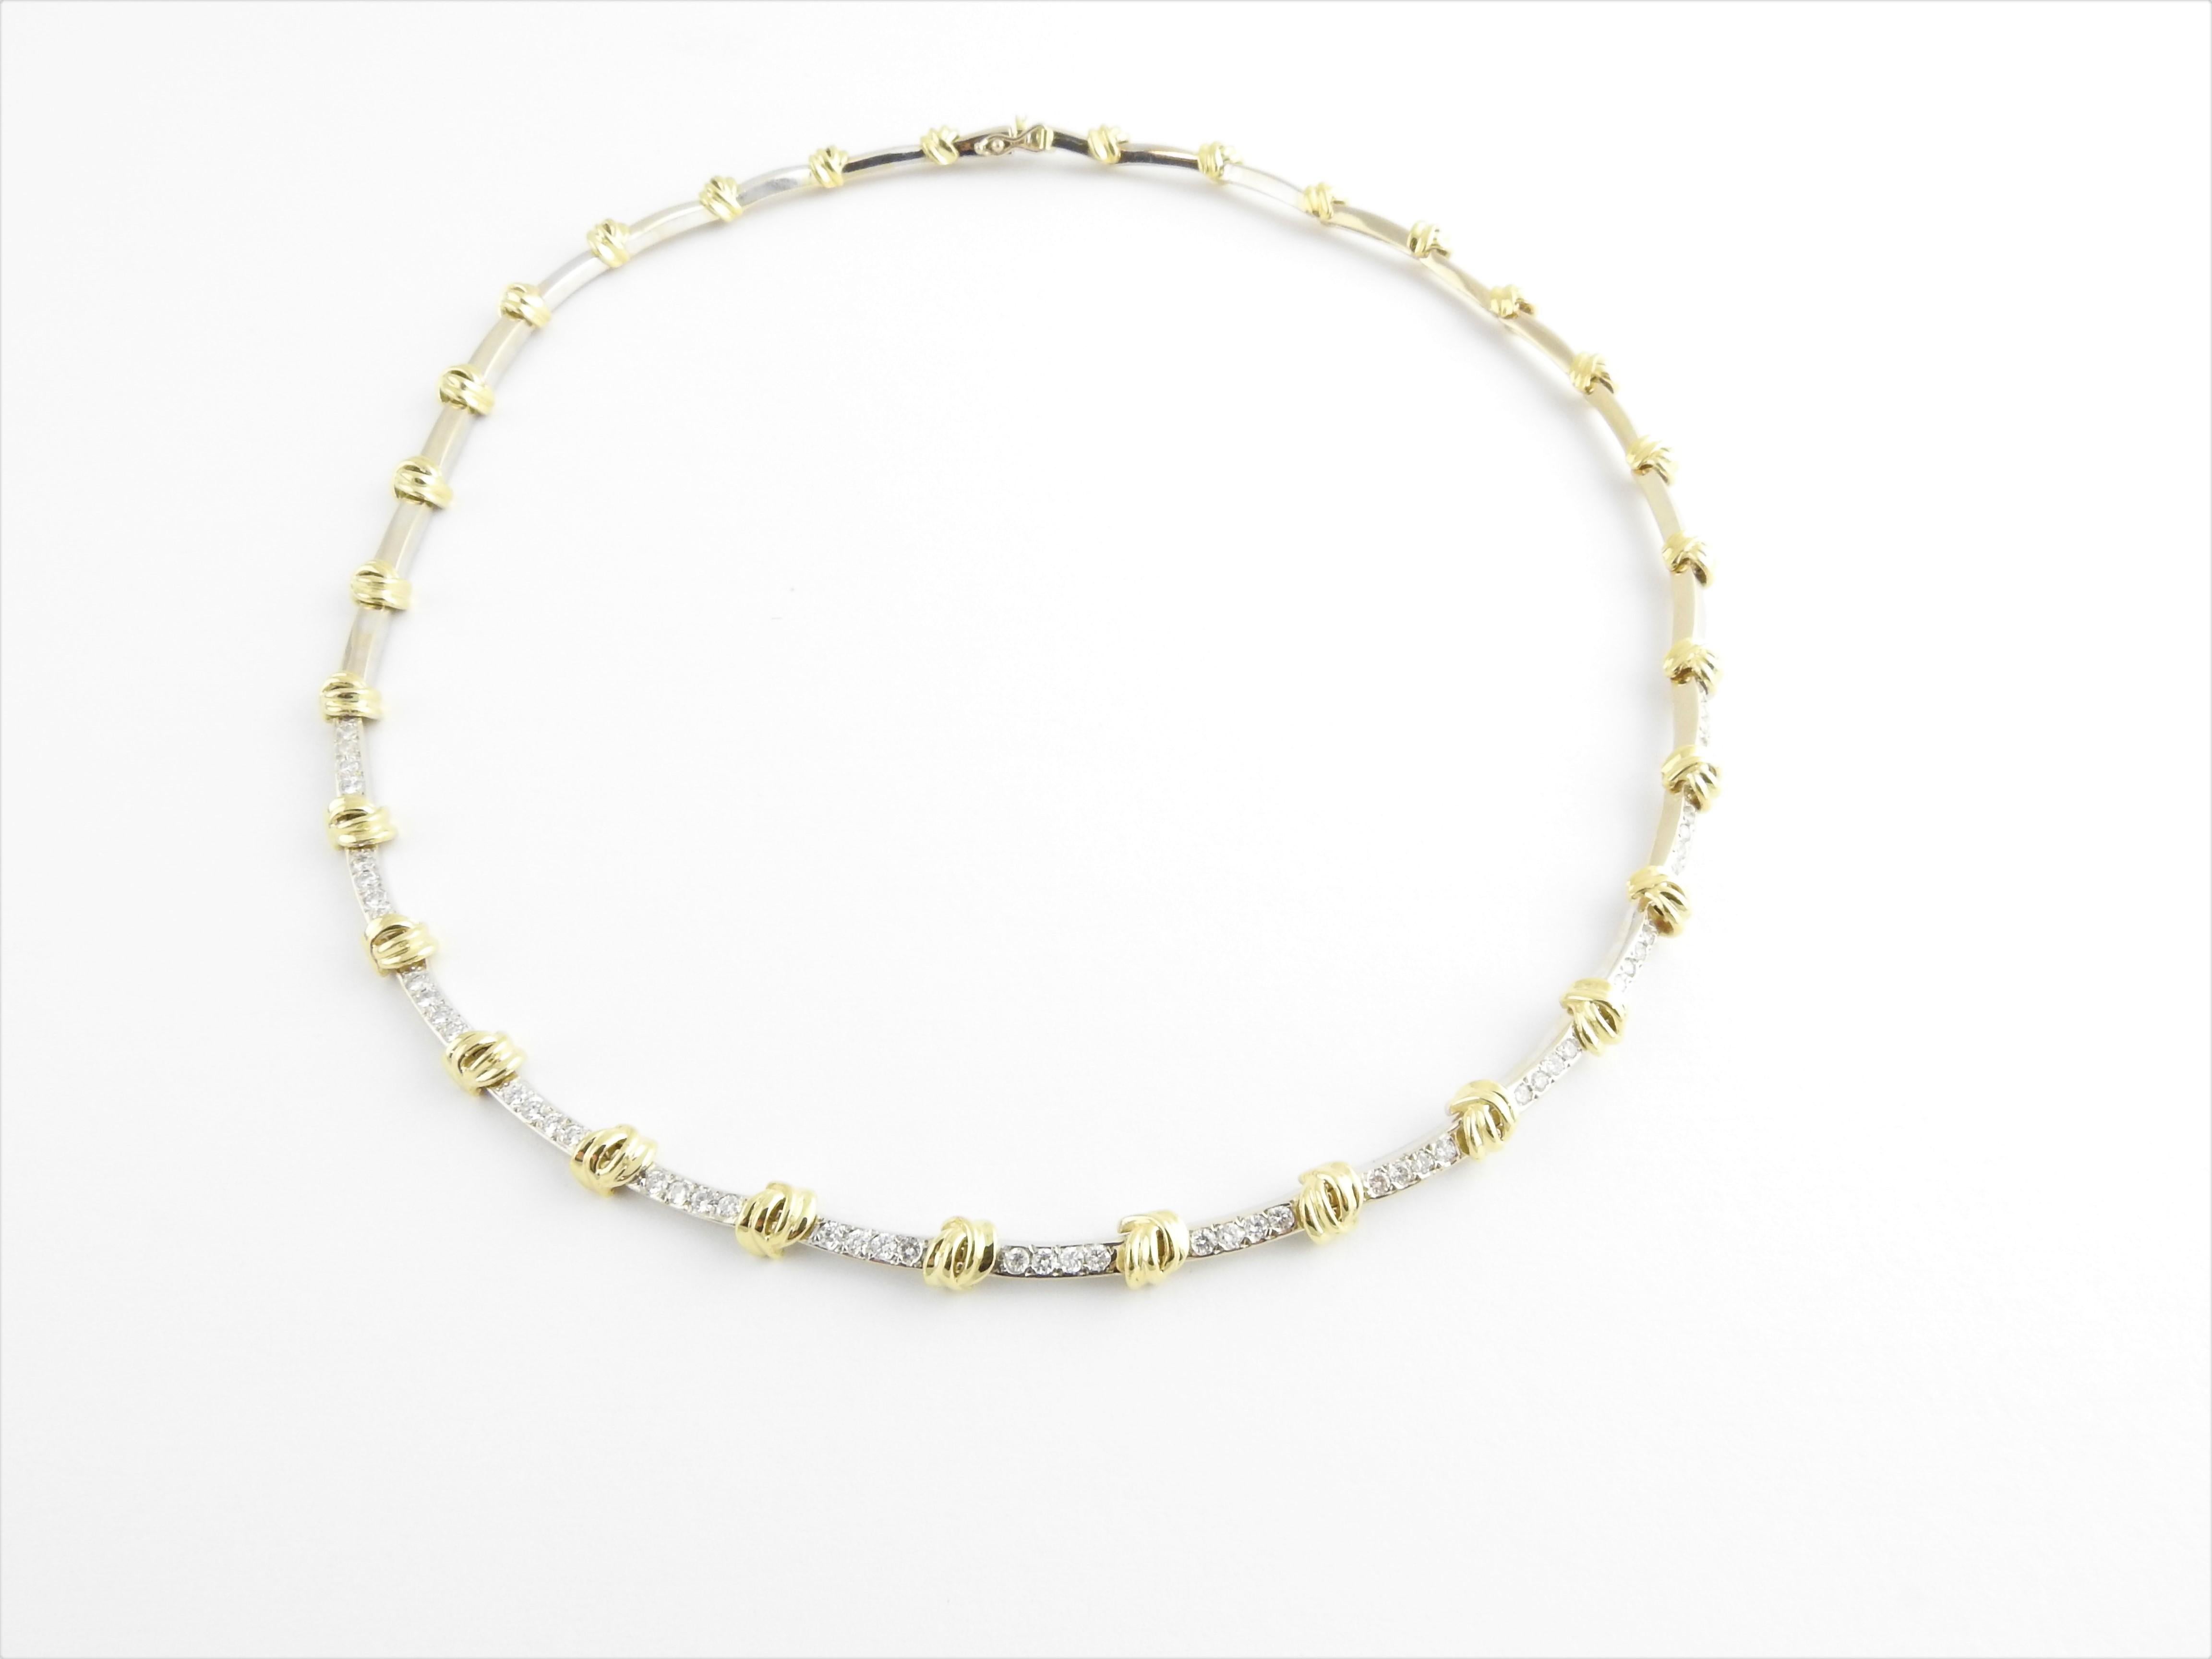 Vintage 18 Karat Yellow and White Gold Diamond Necklace

This spectacular necklace features 62 round brilliant cut diamonds crafted in beautifully detailed 18K white and yellow gold.

Width: 4 mm.

Approximate total diamond weight: 1.24 ct.

Diamond